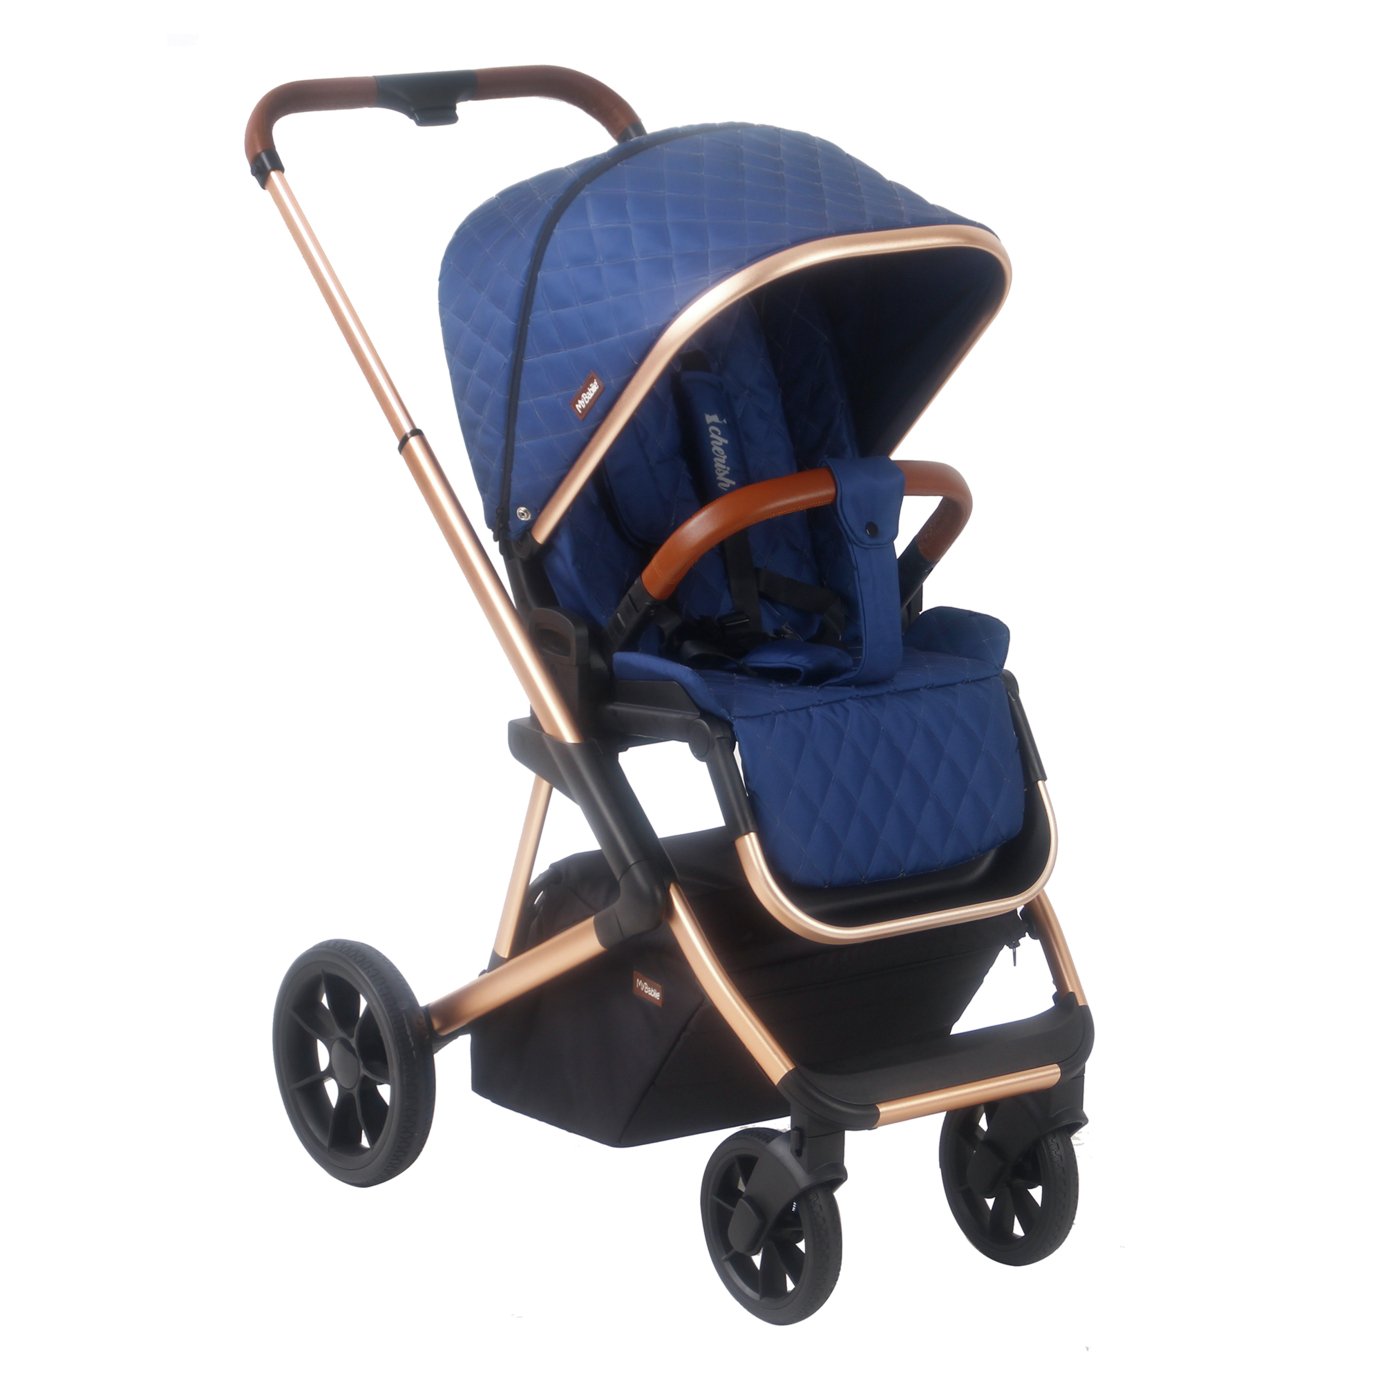 My Babiie MB500i Dani Dyer Opal iSize Travel System